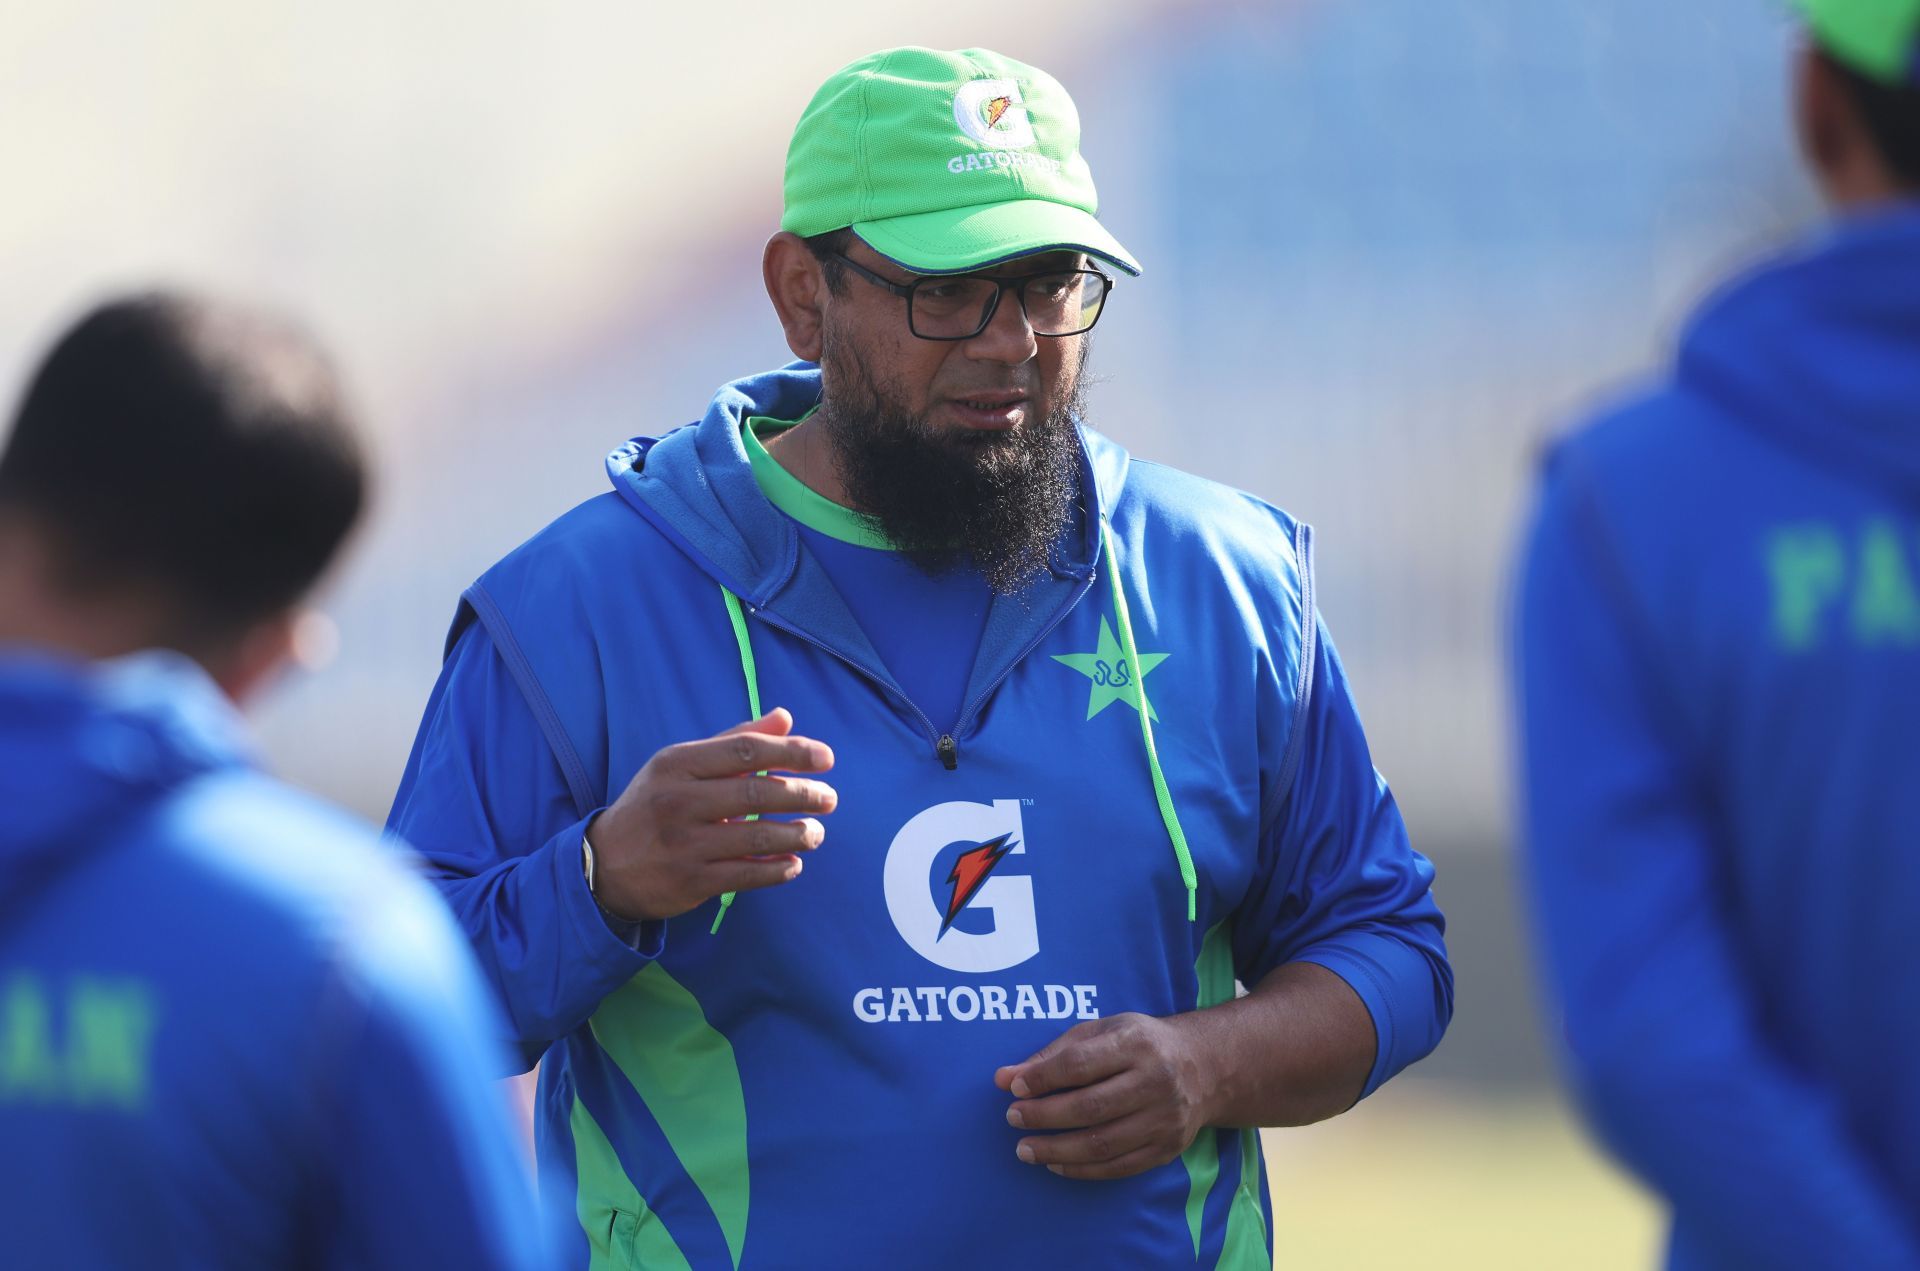 Saqlain Mushtaq was the first spinner to take consecutive five-wicket hauls.